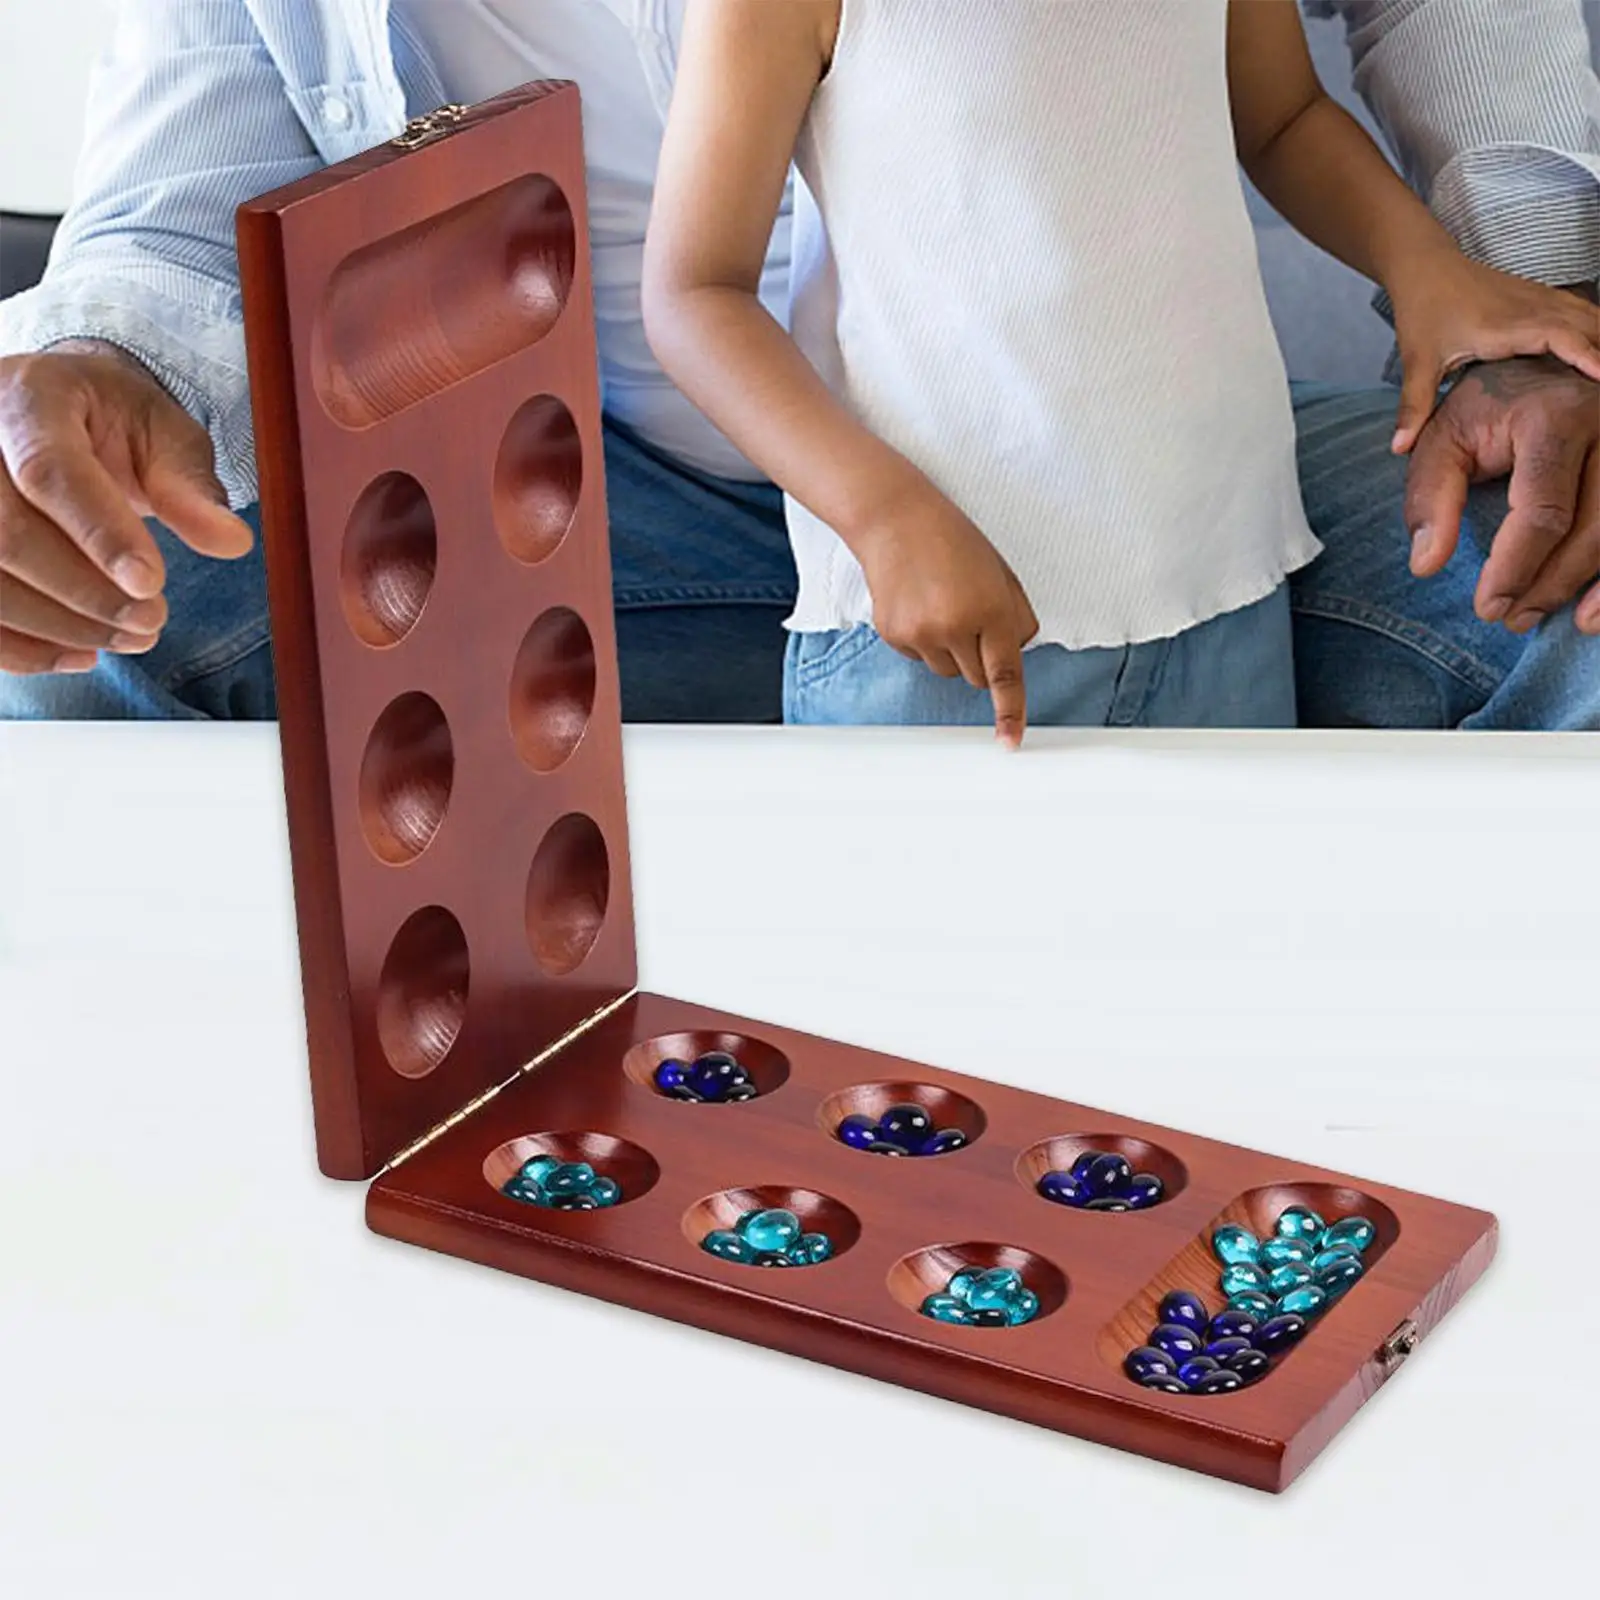 Classic Mancala Board Game, Math Skills with 48 Stones Logic Planning Skills for Entertainment